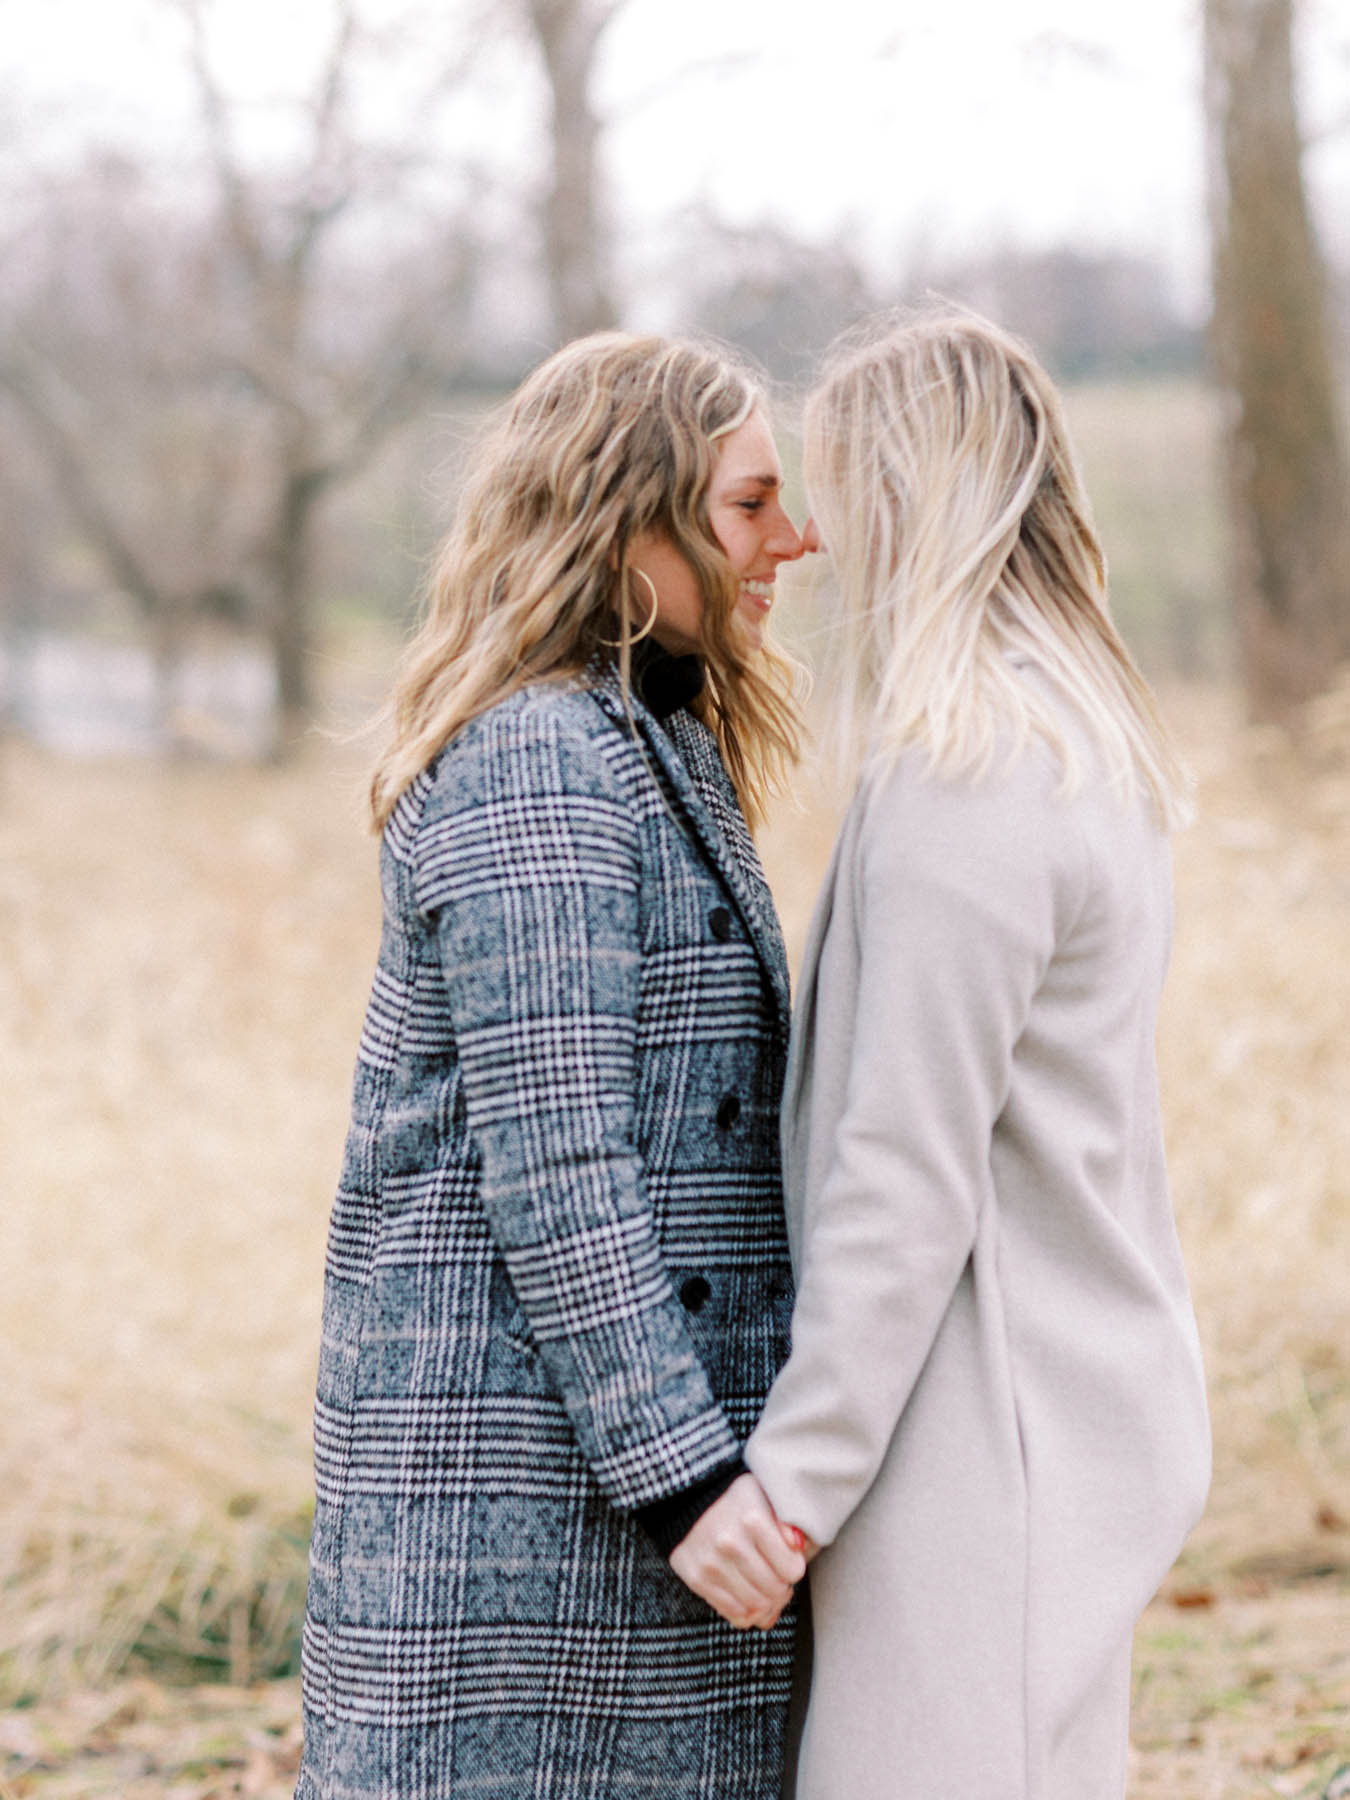 Two blonde people hold hands and touch noses with a winter wooded background behind them.